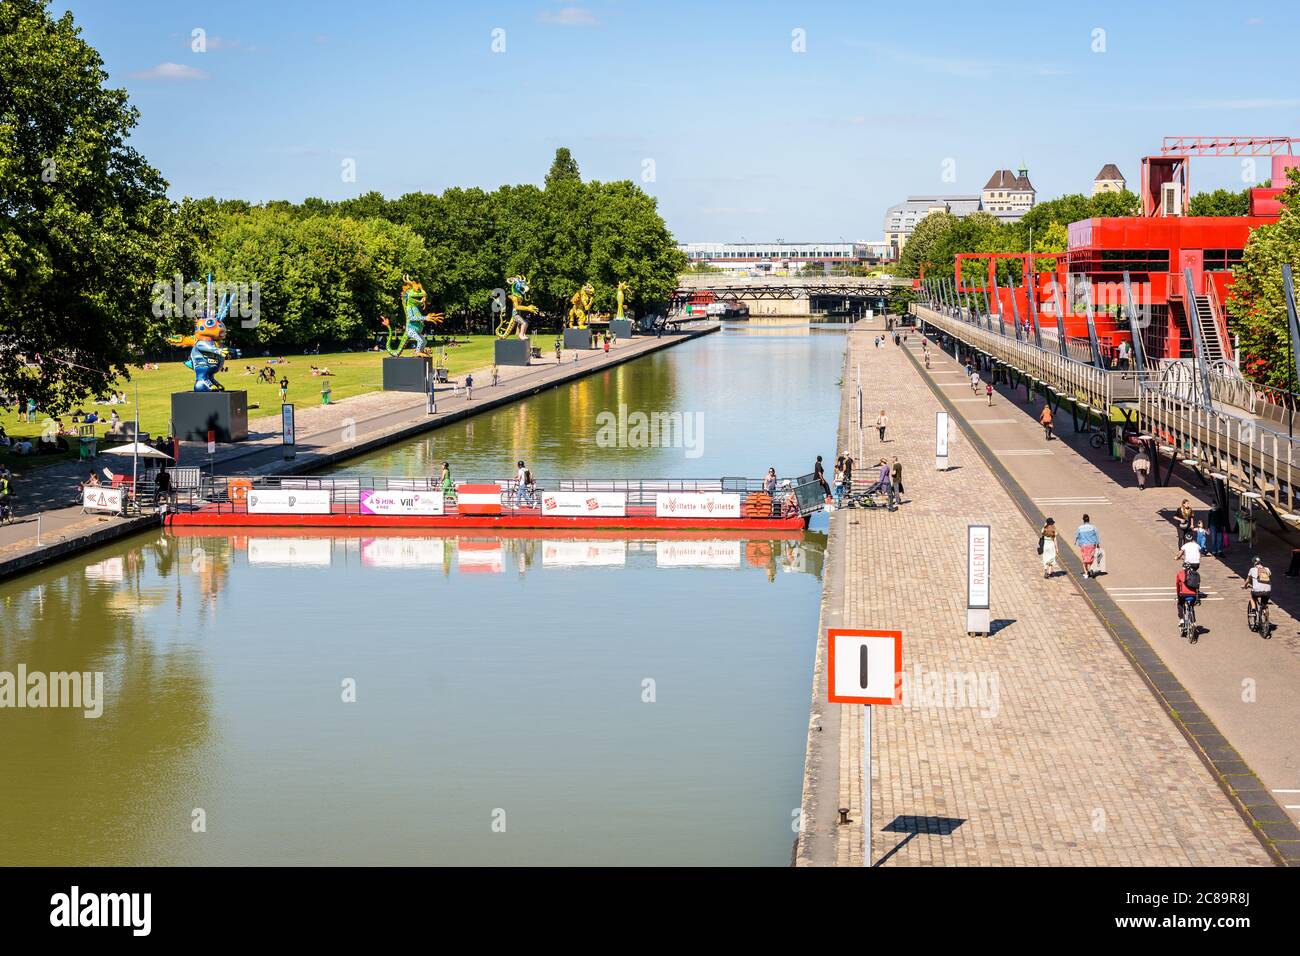 The Canal de l'Ourcq splits the parc de la Villette in Paris, France, crossed by a mobile floating footbridge and bordered by statues and follies. Stock Photo